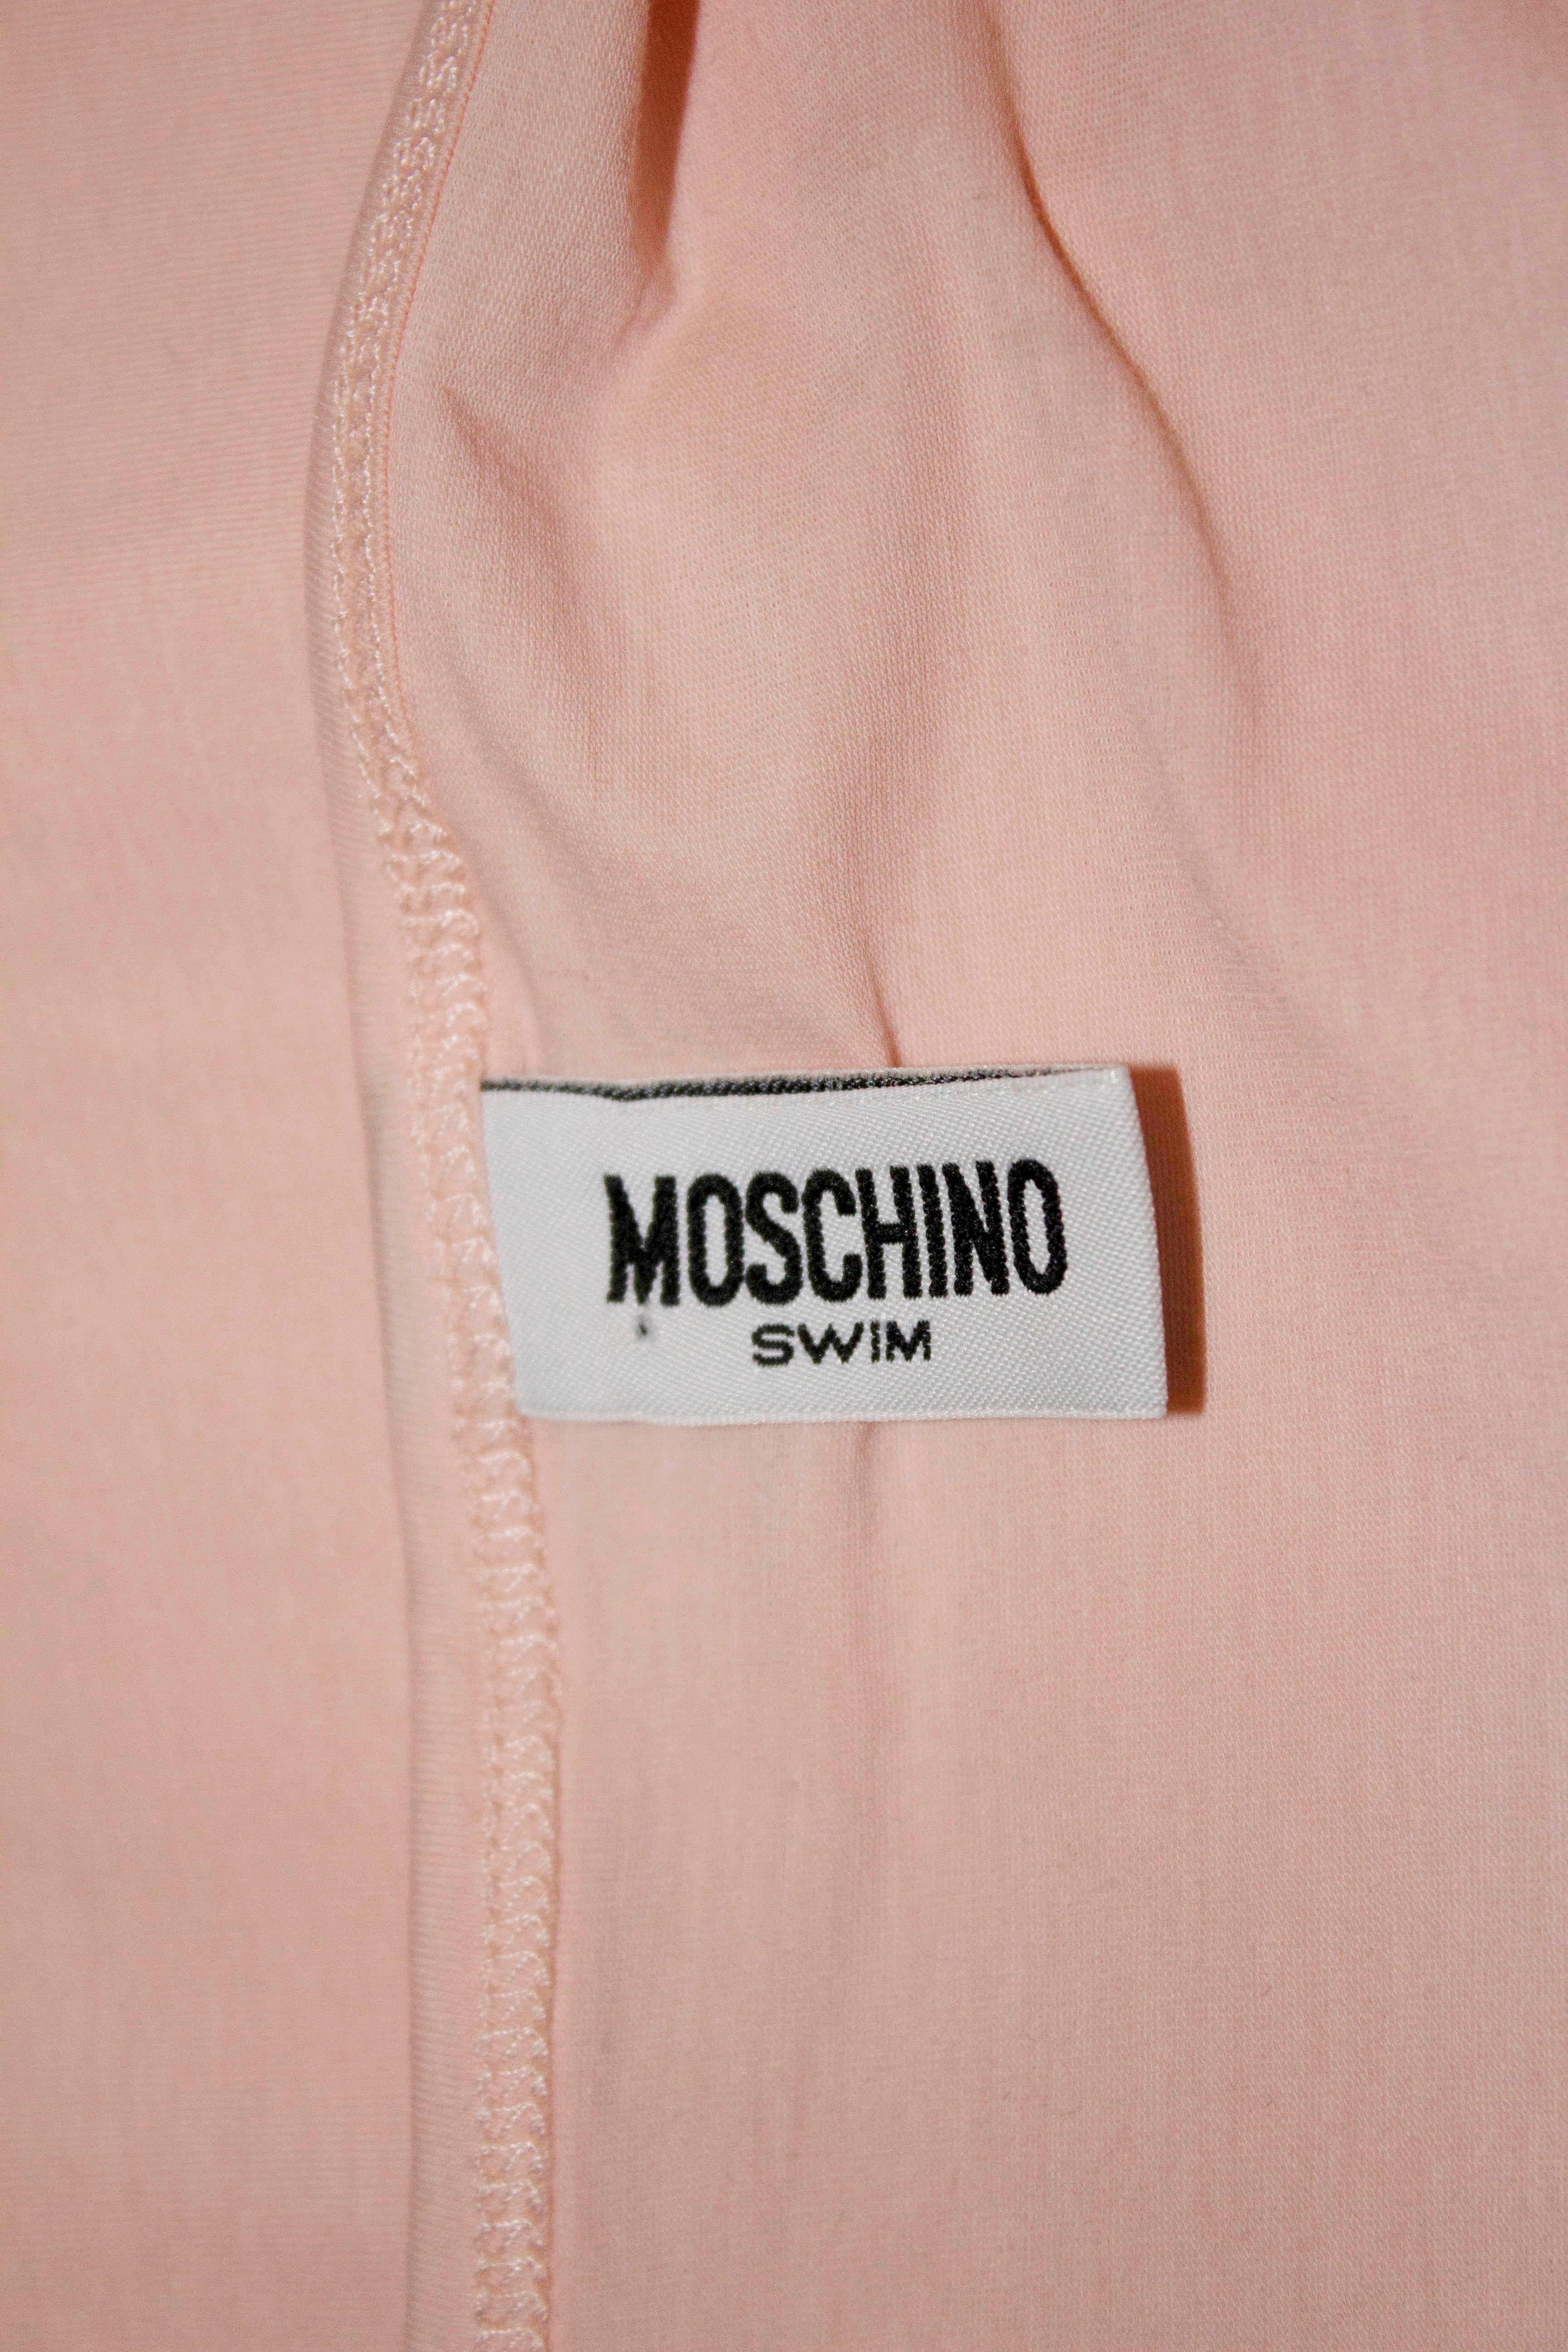 A pretty pink dress for the beach or holiday  by Moschino Swim. In a pretty shade of pink the dress has cap sleaves and a lace trim. 

Size Italian 42, bust 34'', length 33''.